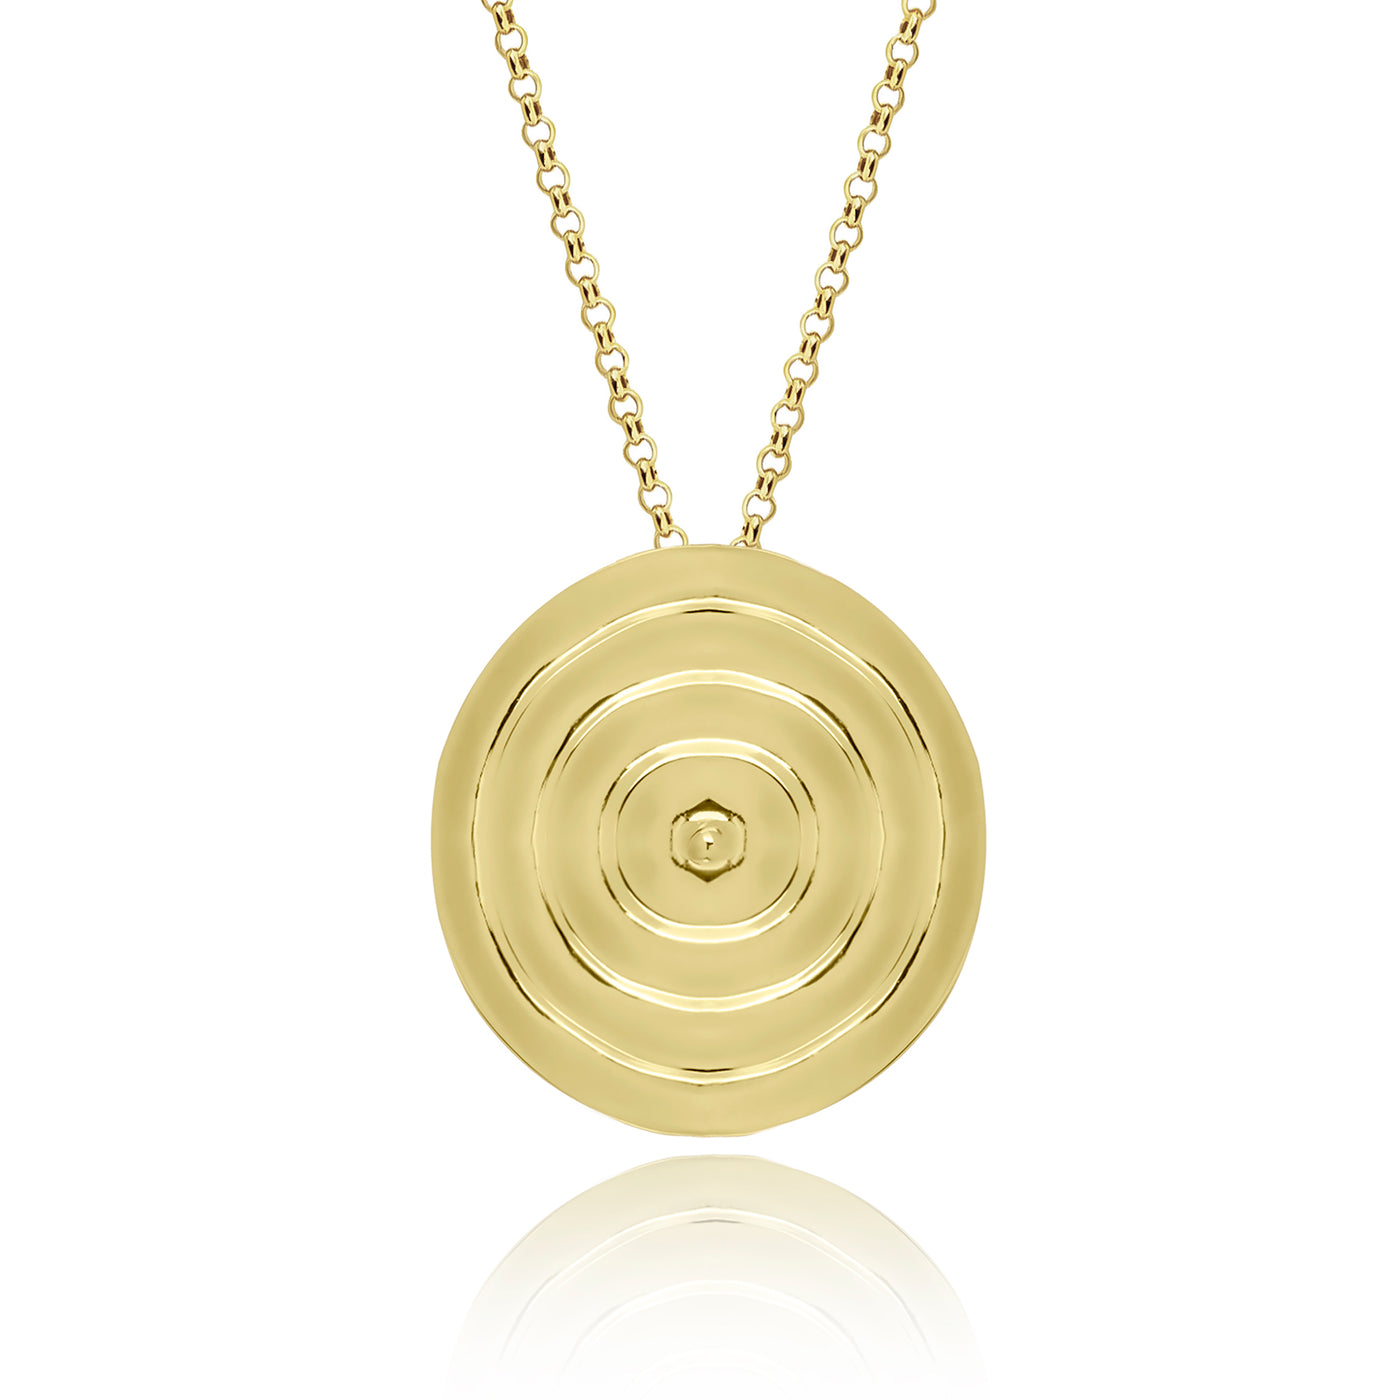 Gold round necklace from Atelier ORMAN